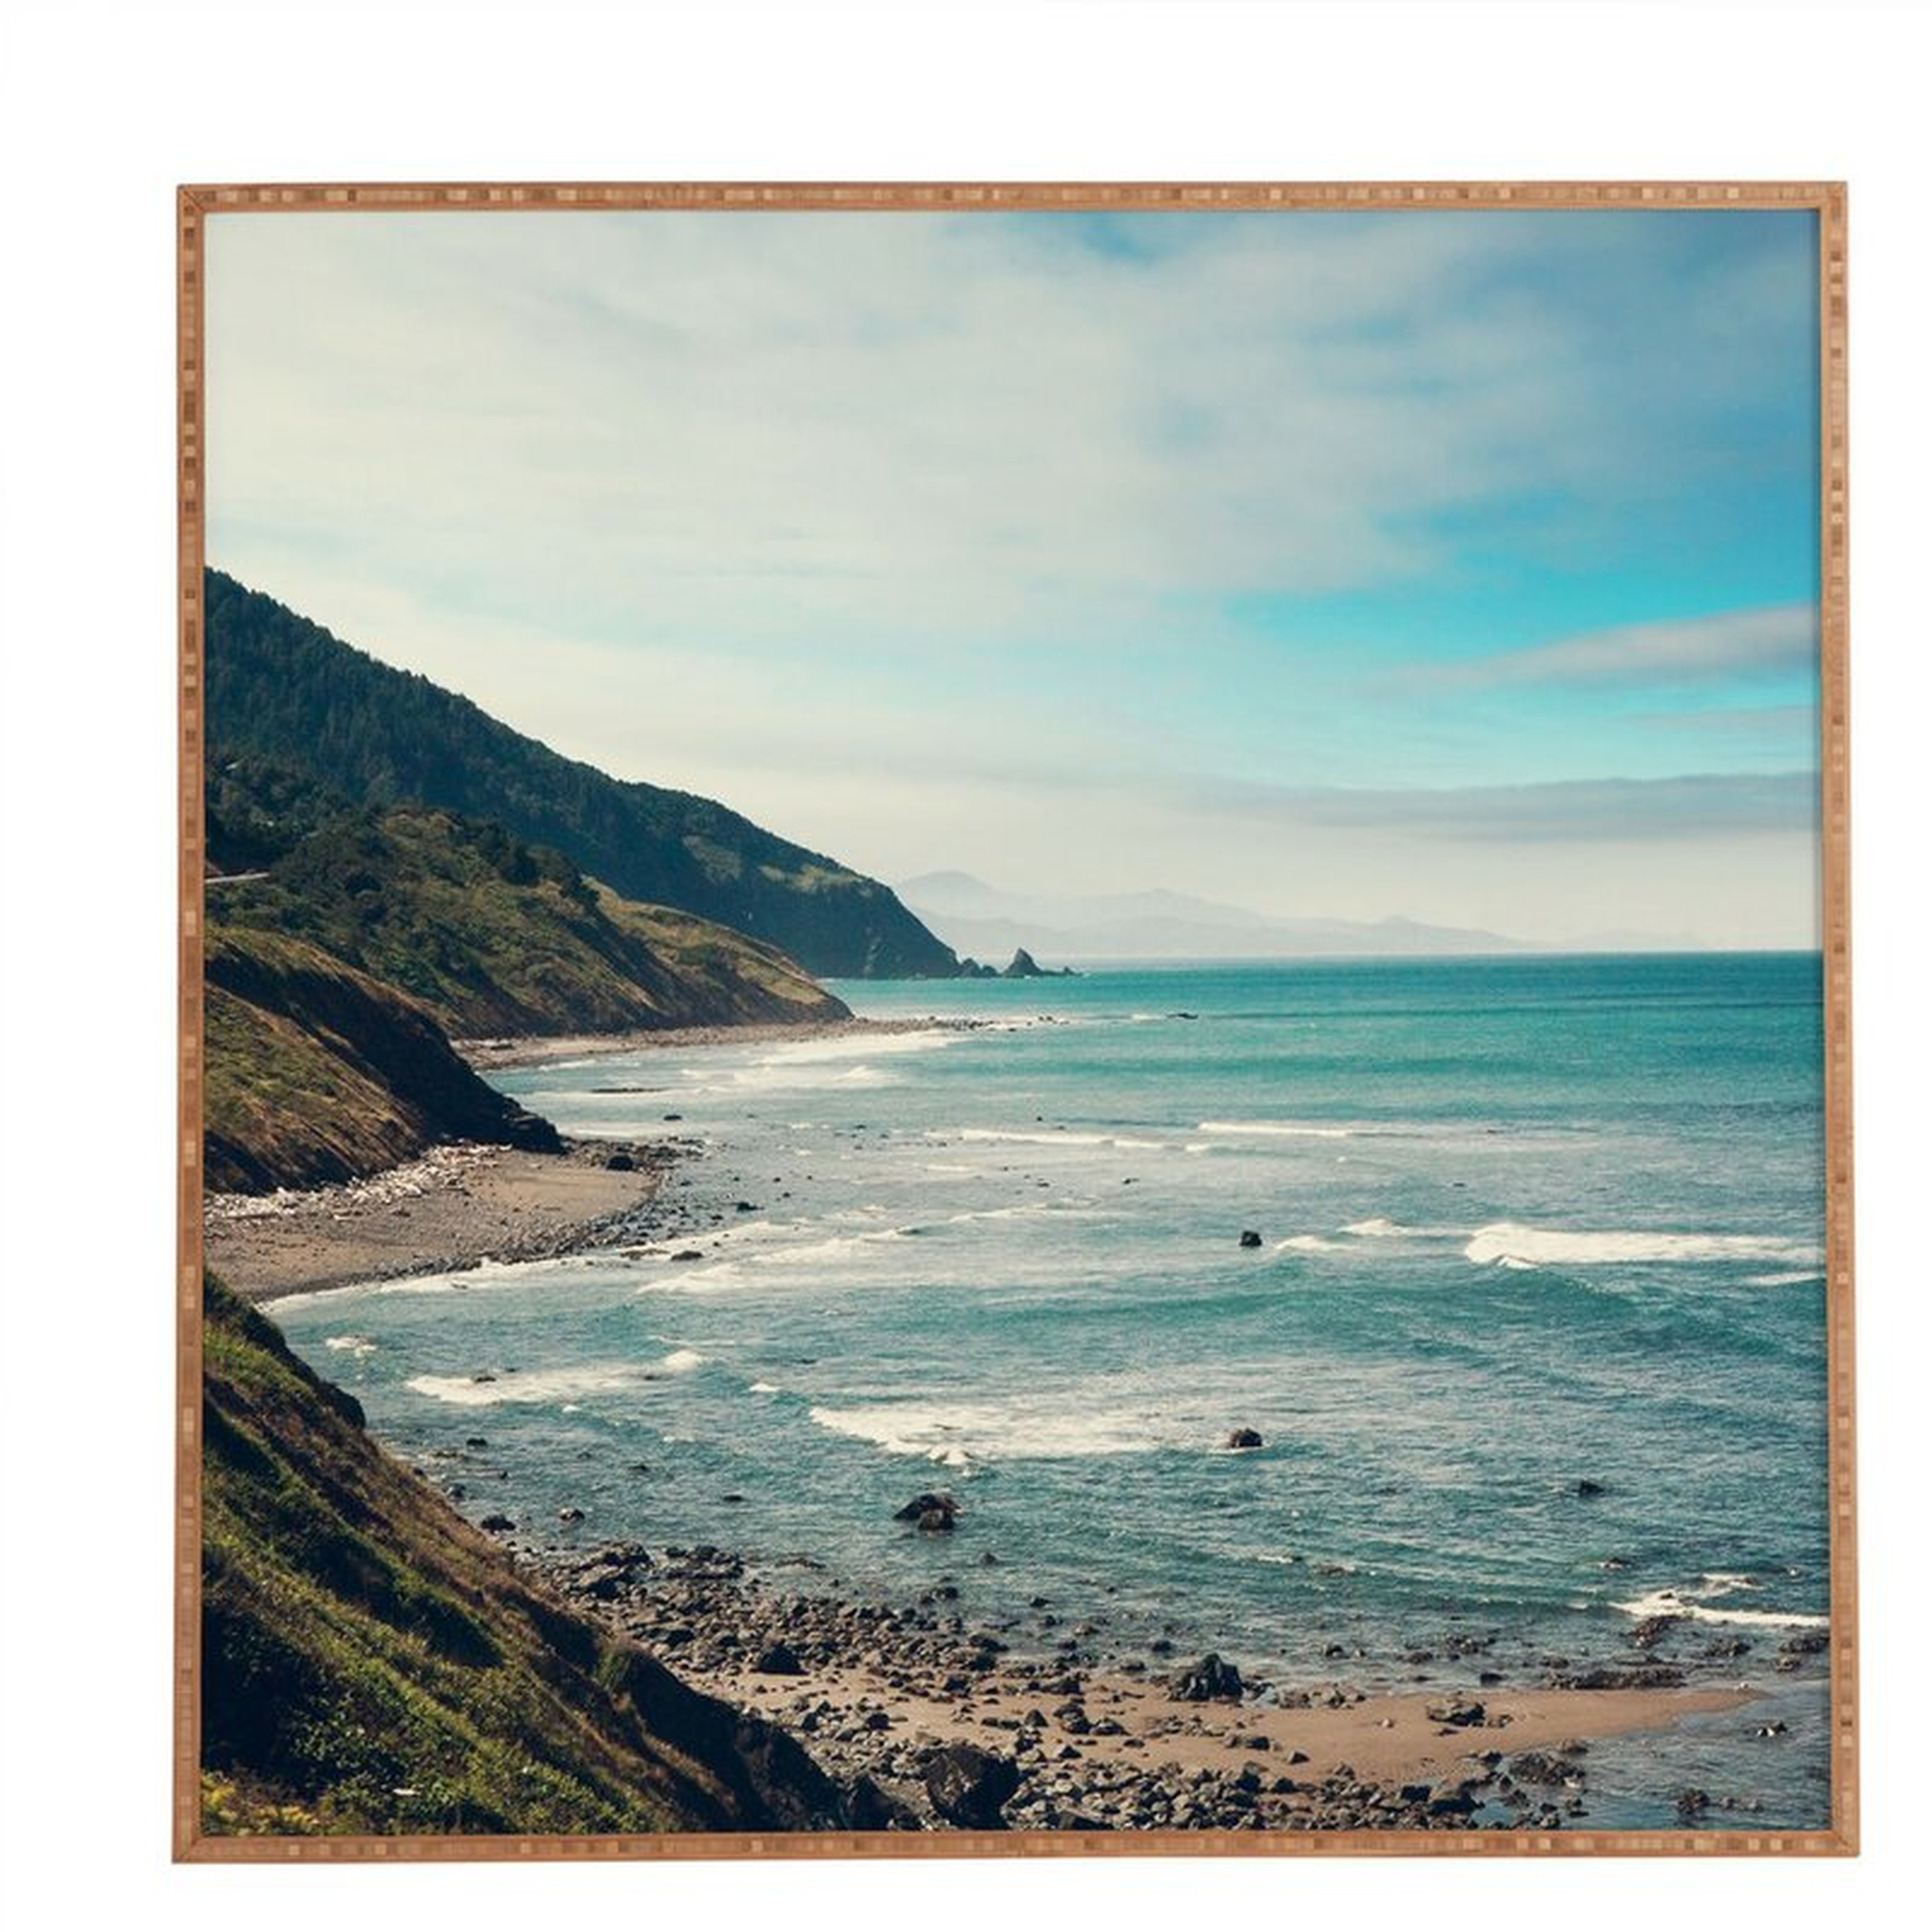 California Pacific Coast Highway by Laura Trevey - Picture Frame Graphic Art Print on Wood - Wayfair